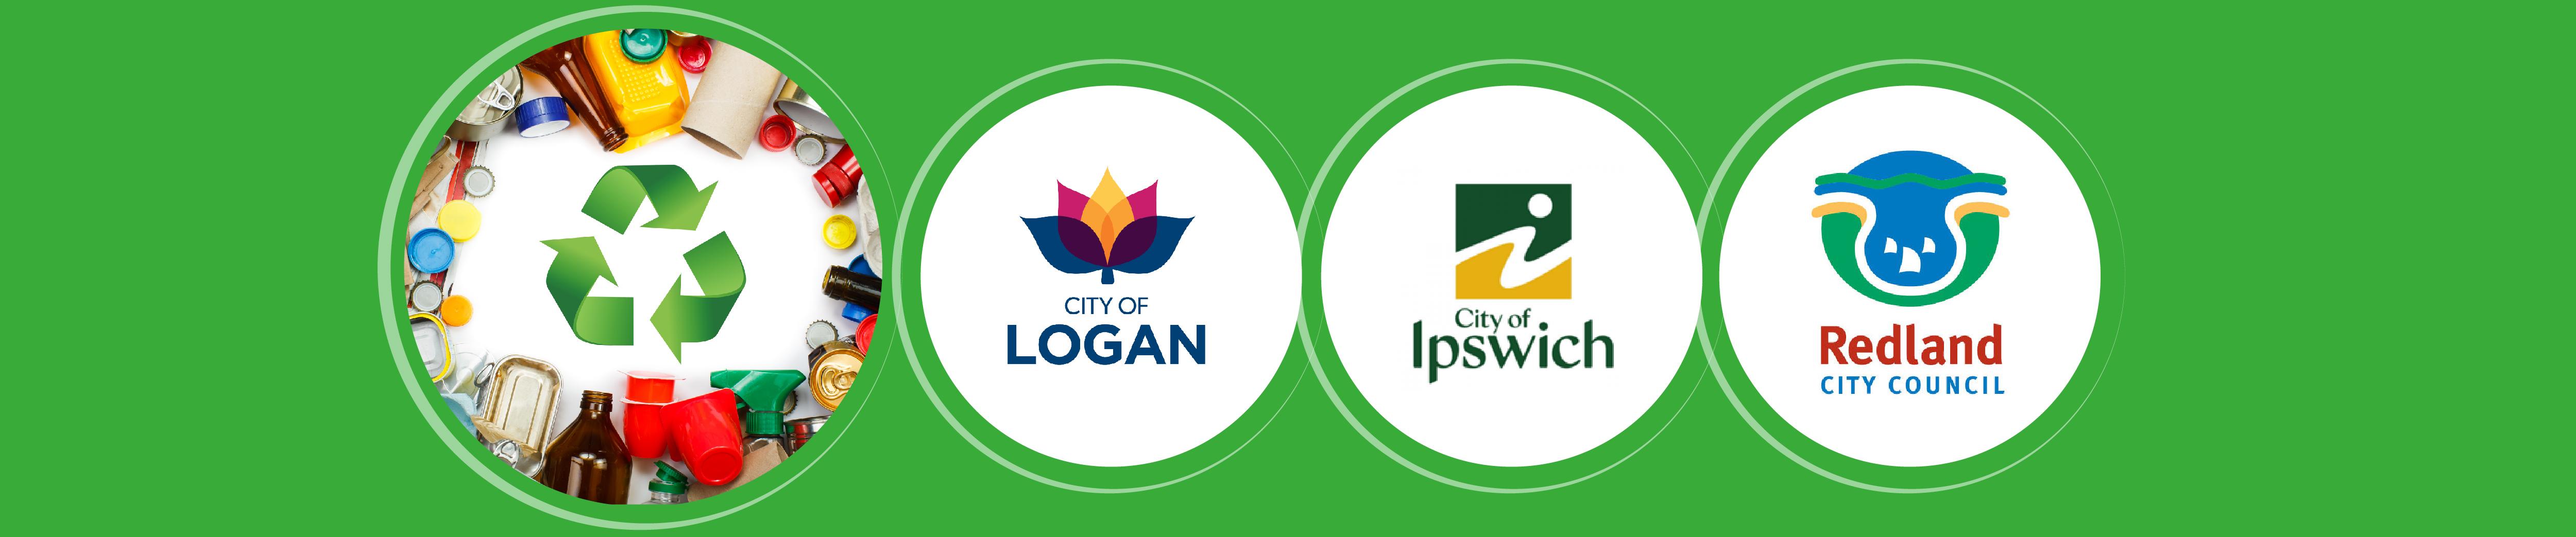 Logos from the City of Logan, City of Ipswich and Redland City Council.